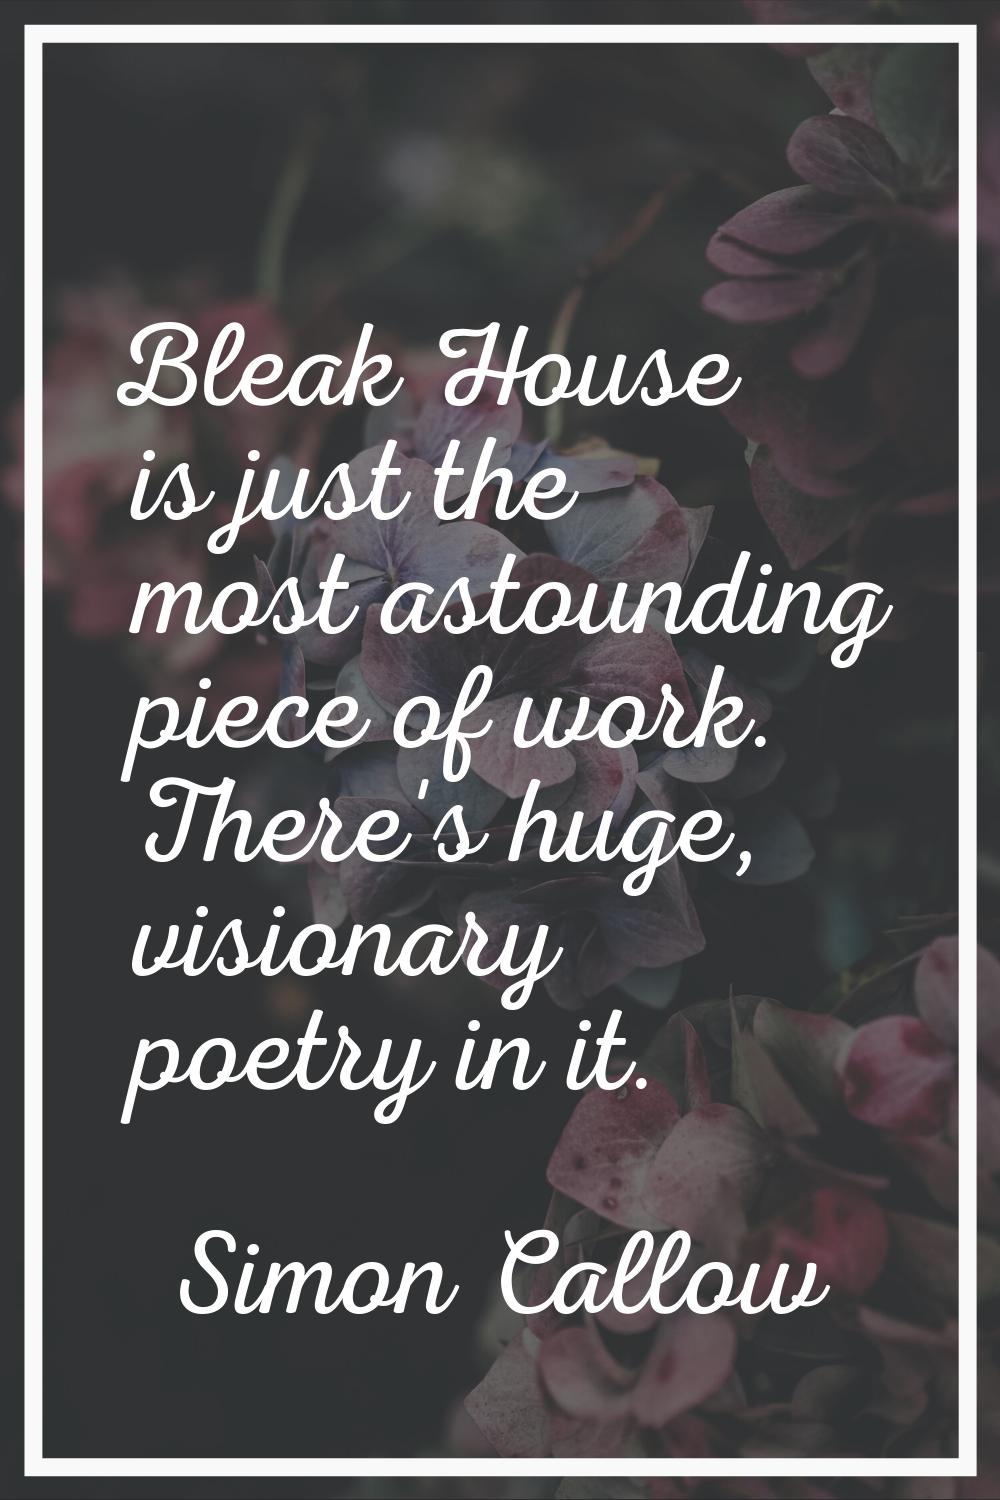 Bleak House is just the most astounding piece of work. There's huge, visionary poetry in it.